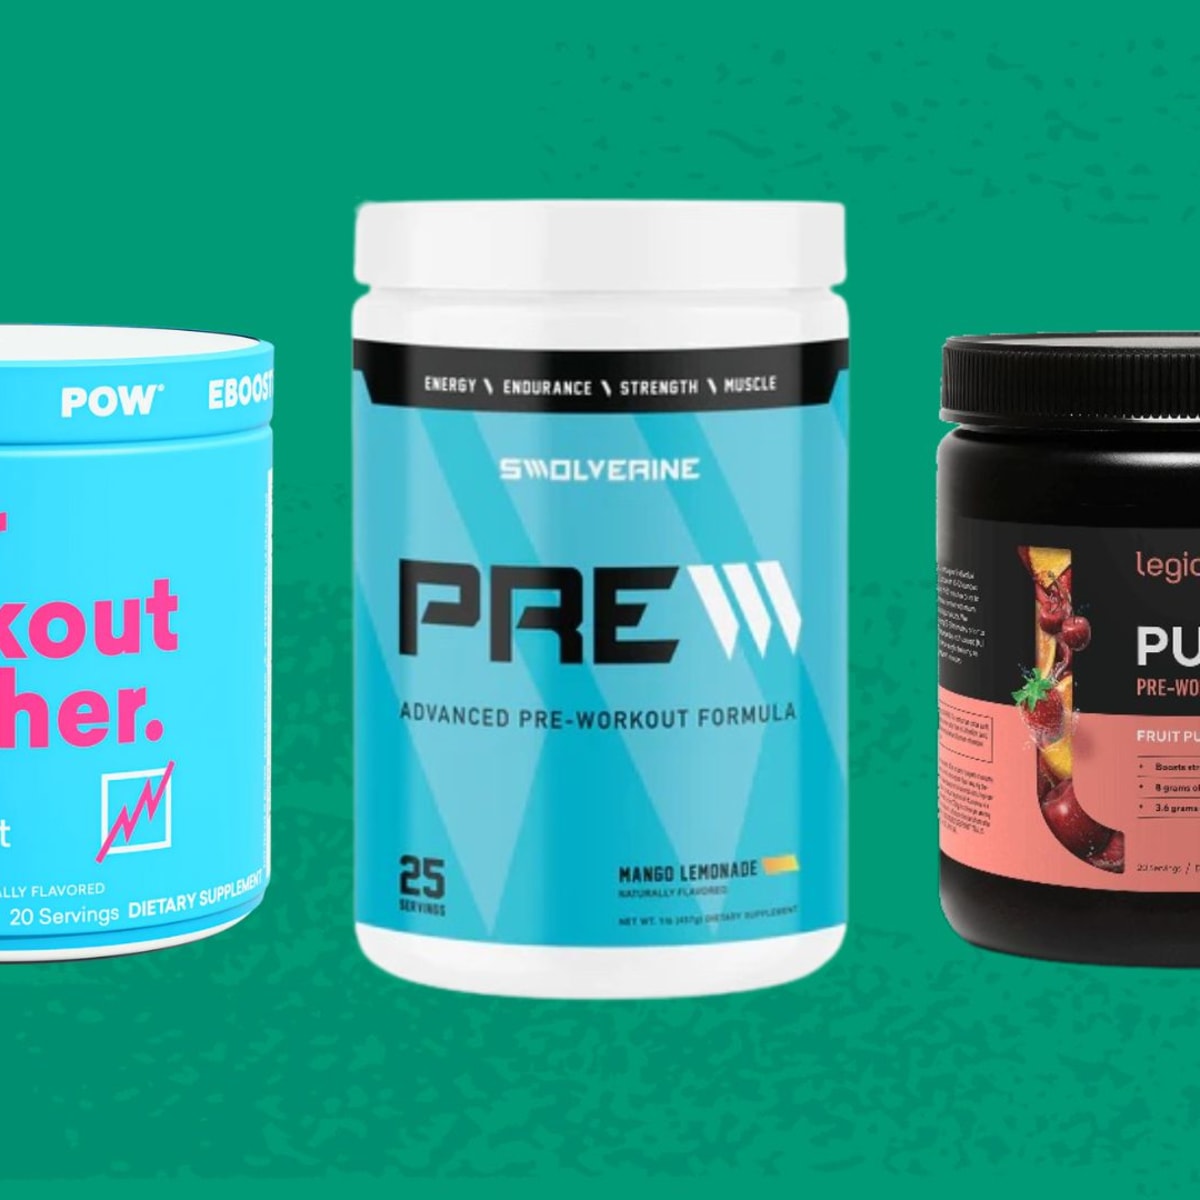 5 Best Cheap Pre-Workout Supplements in 2023